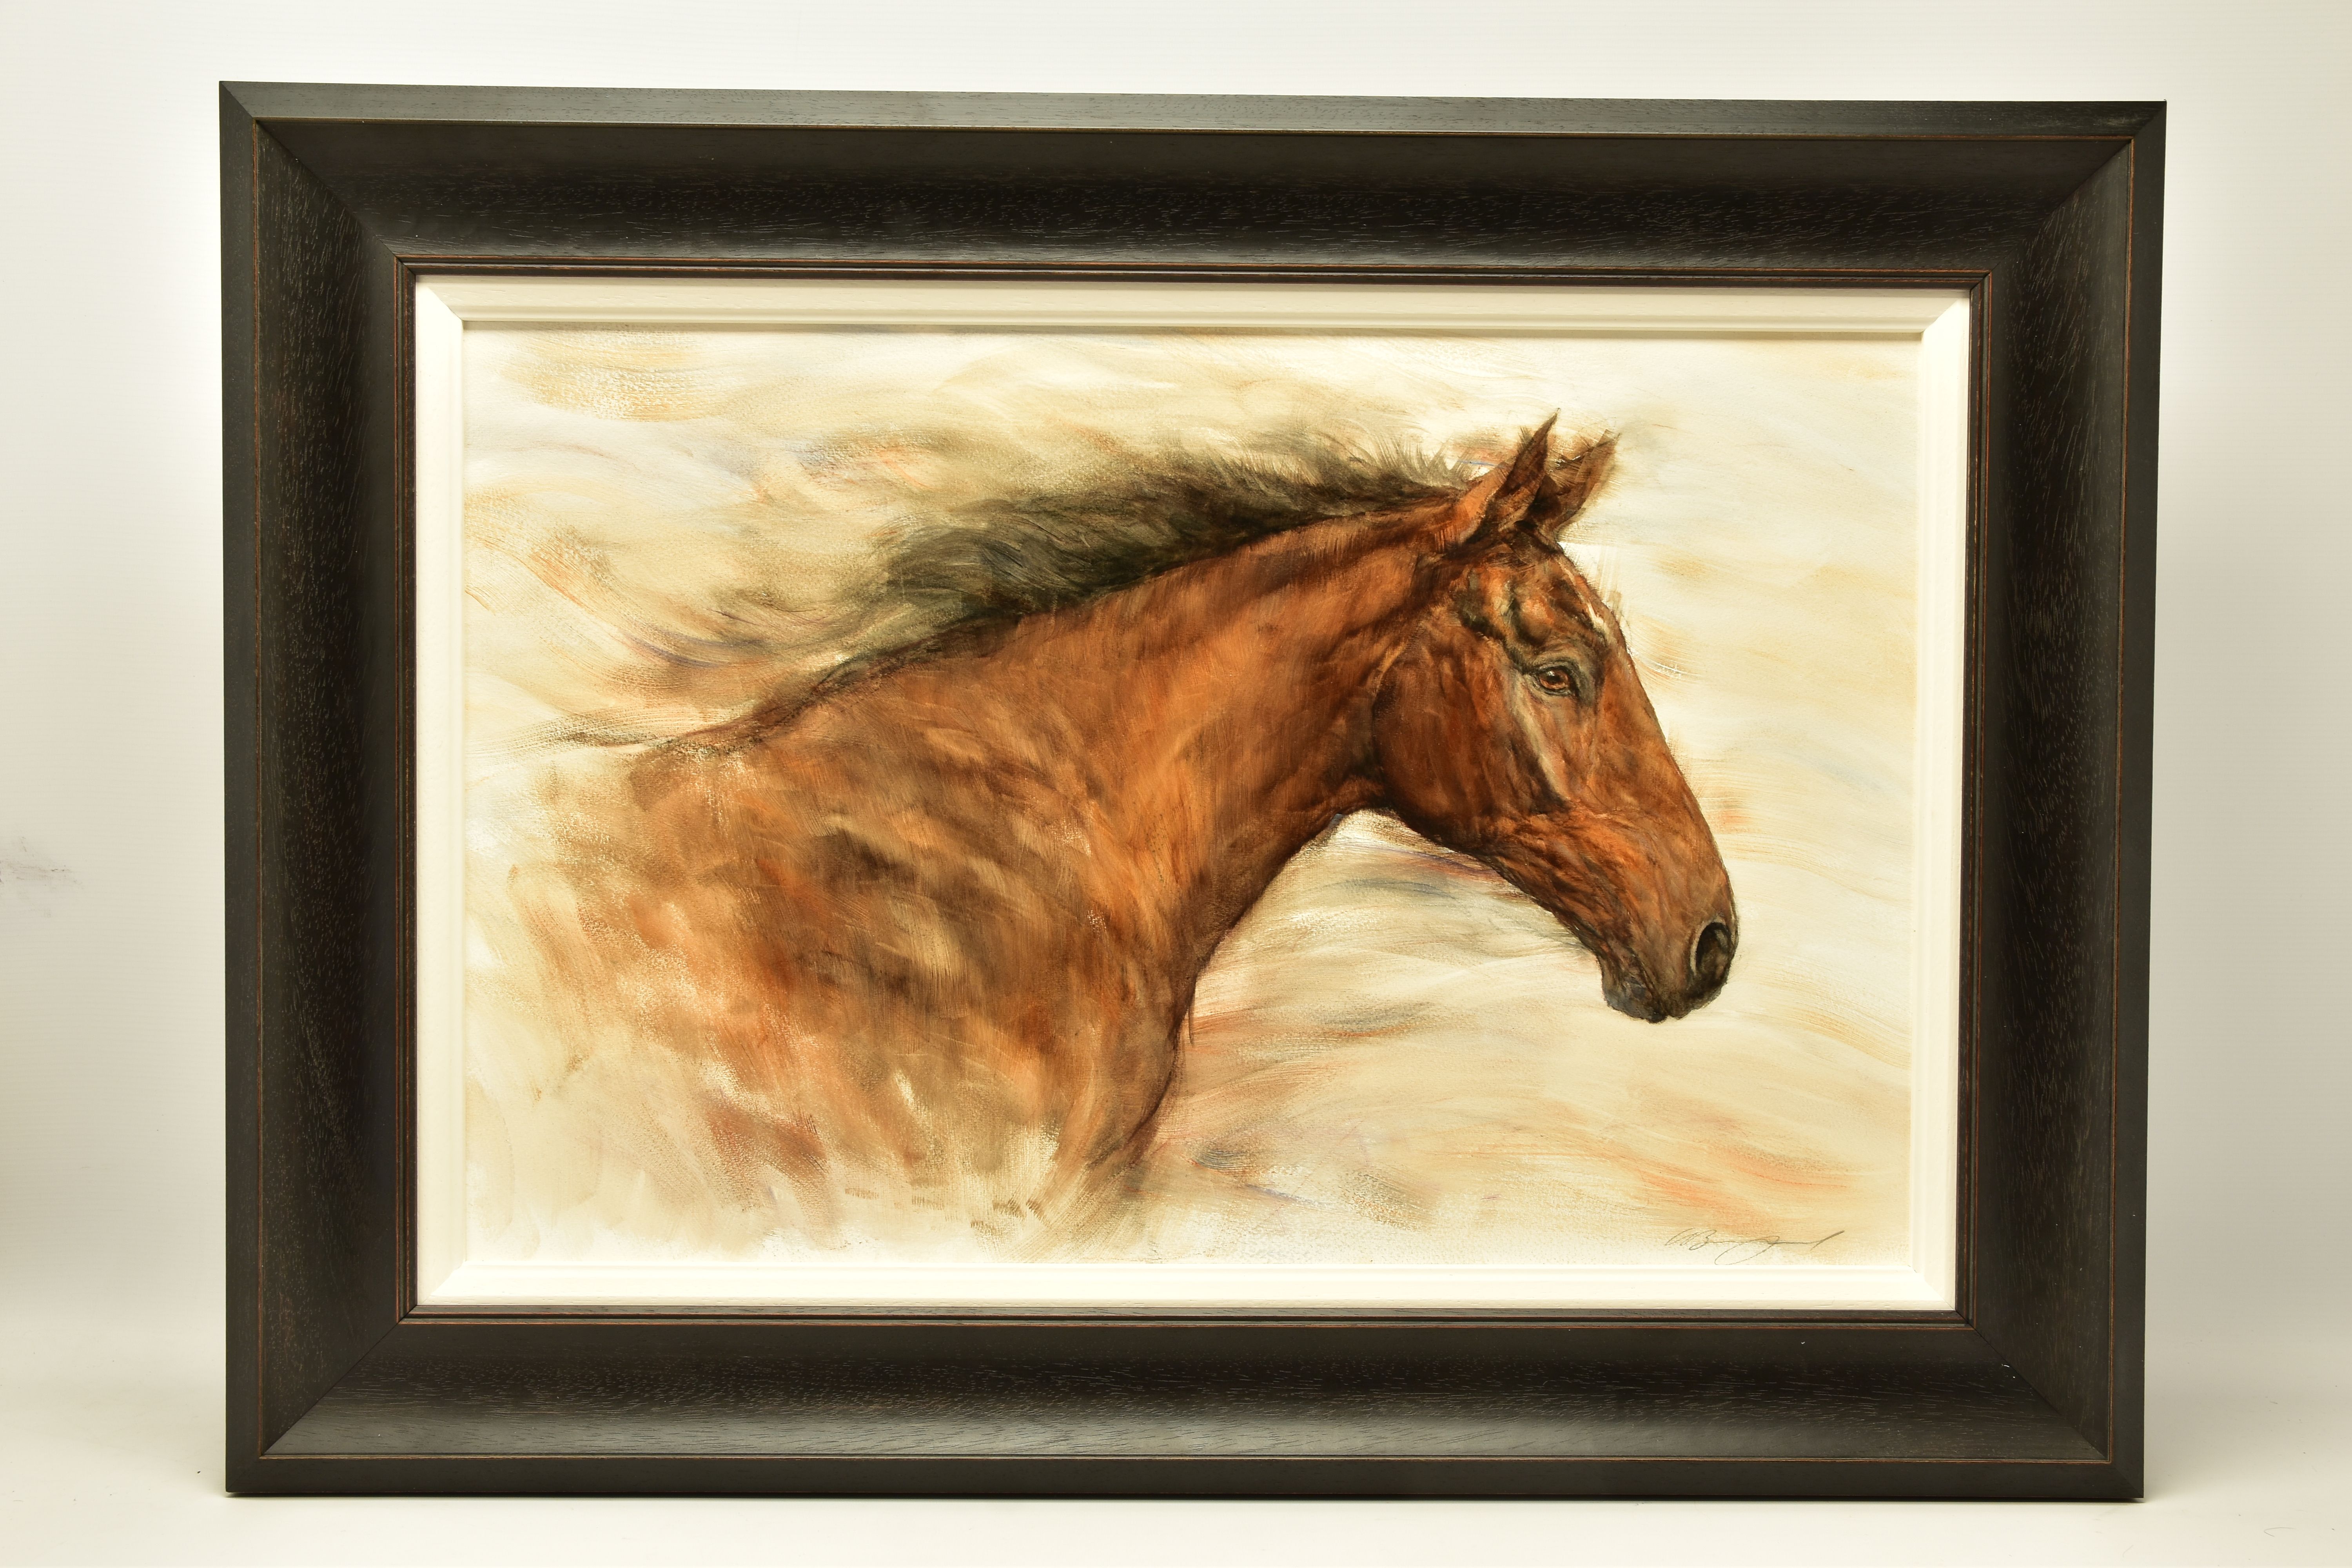 GARY BENFIELD (BRITISH 1961) 'SOFT BREEZE', a portrait study of a brown horse, signed bottom